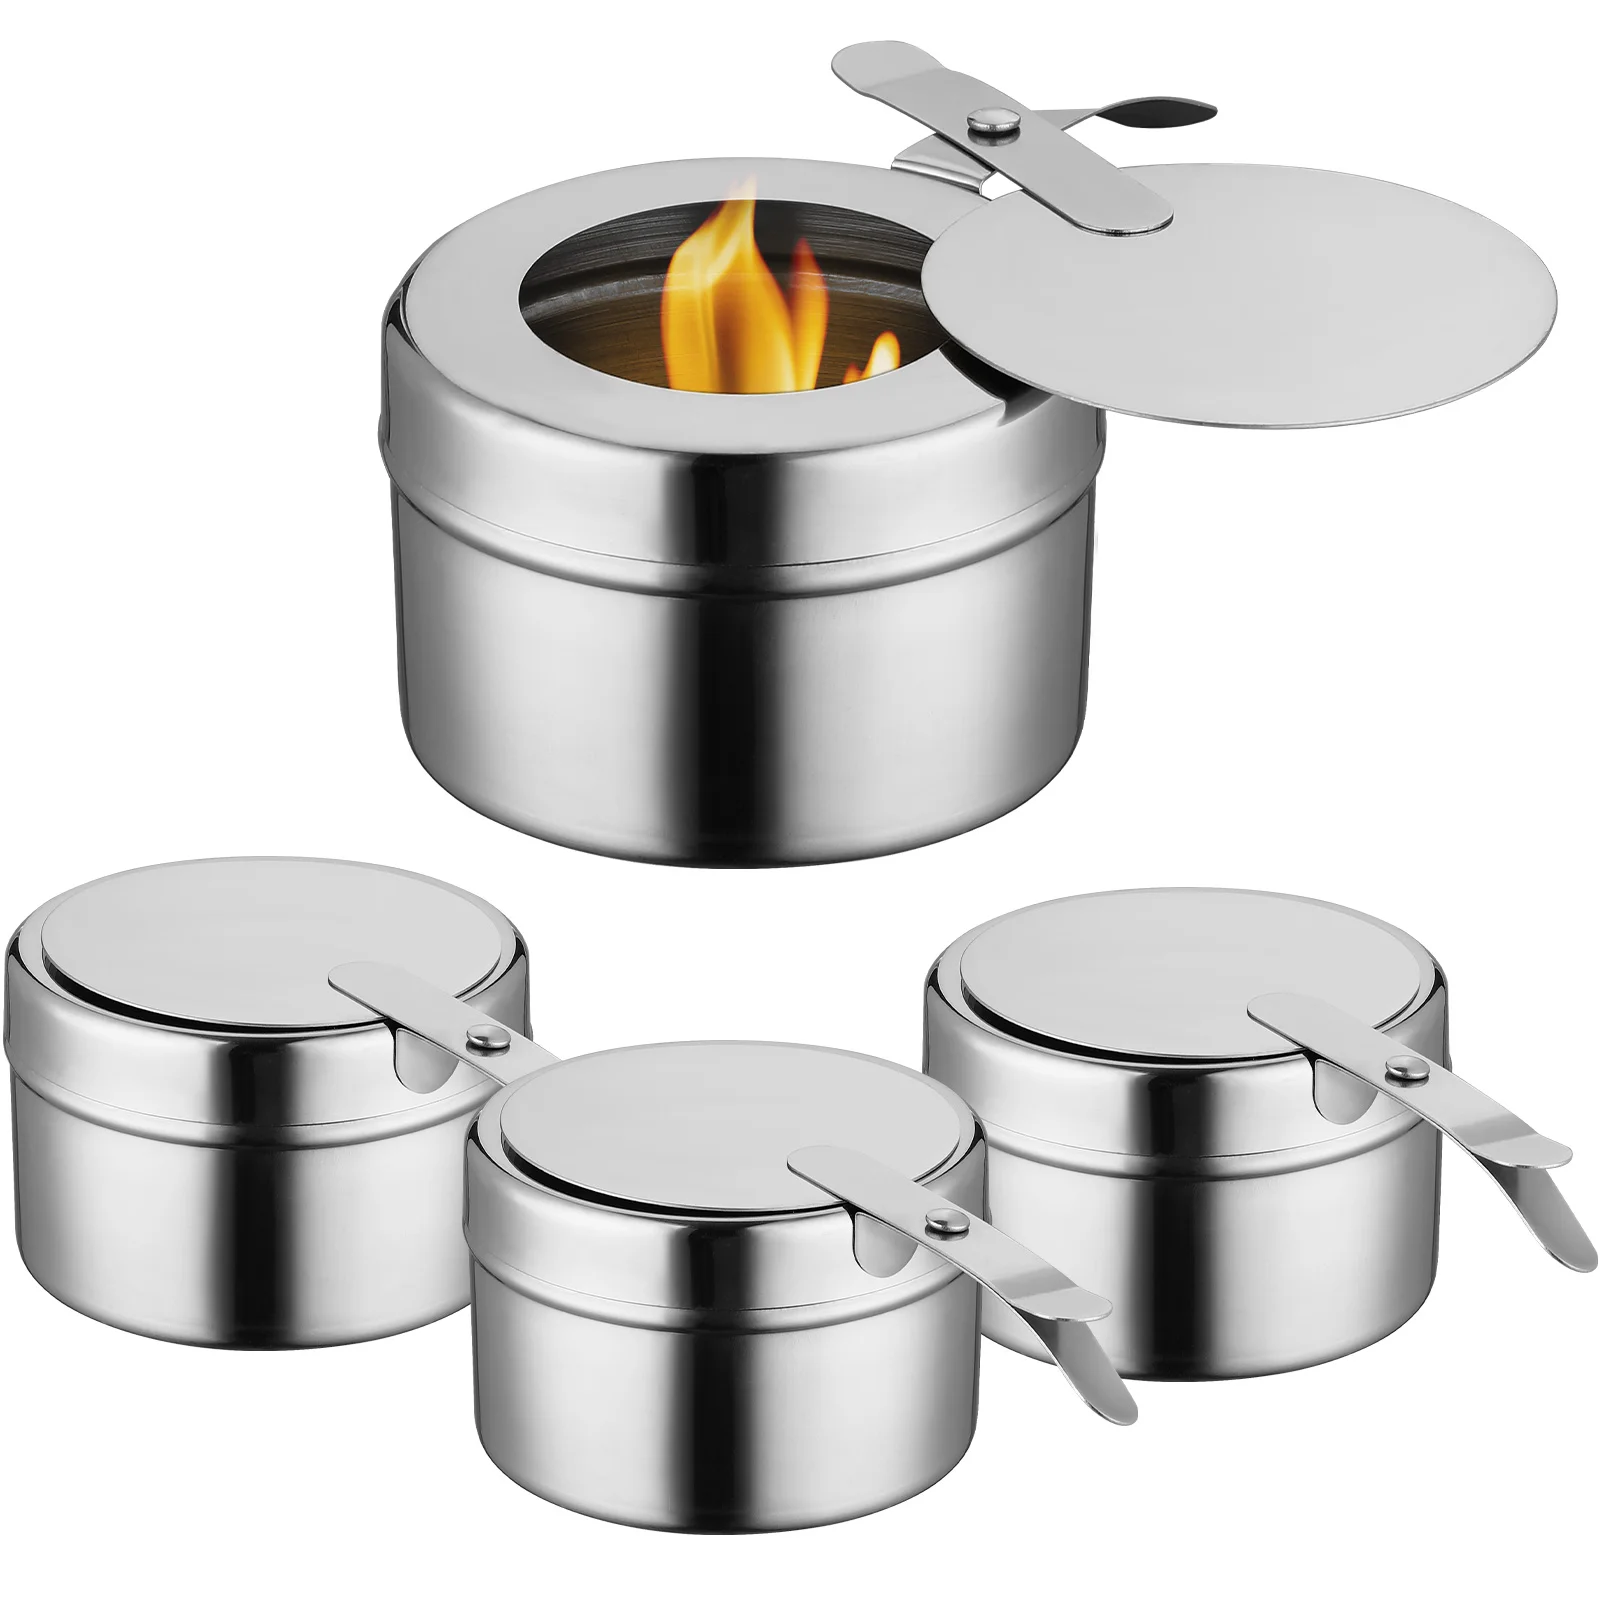 

Furnace Core Fuel Holder Lid Chafer Wick Holders Boxs Canned Heat Dish Chafers Warmers Cans Stainless Chafing